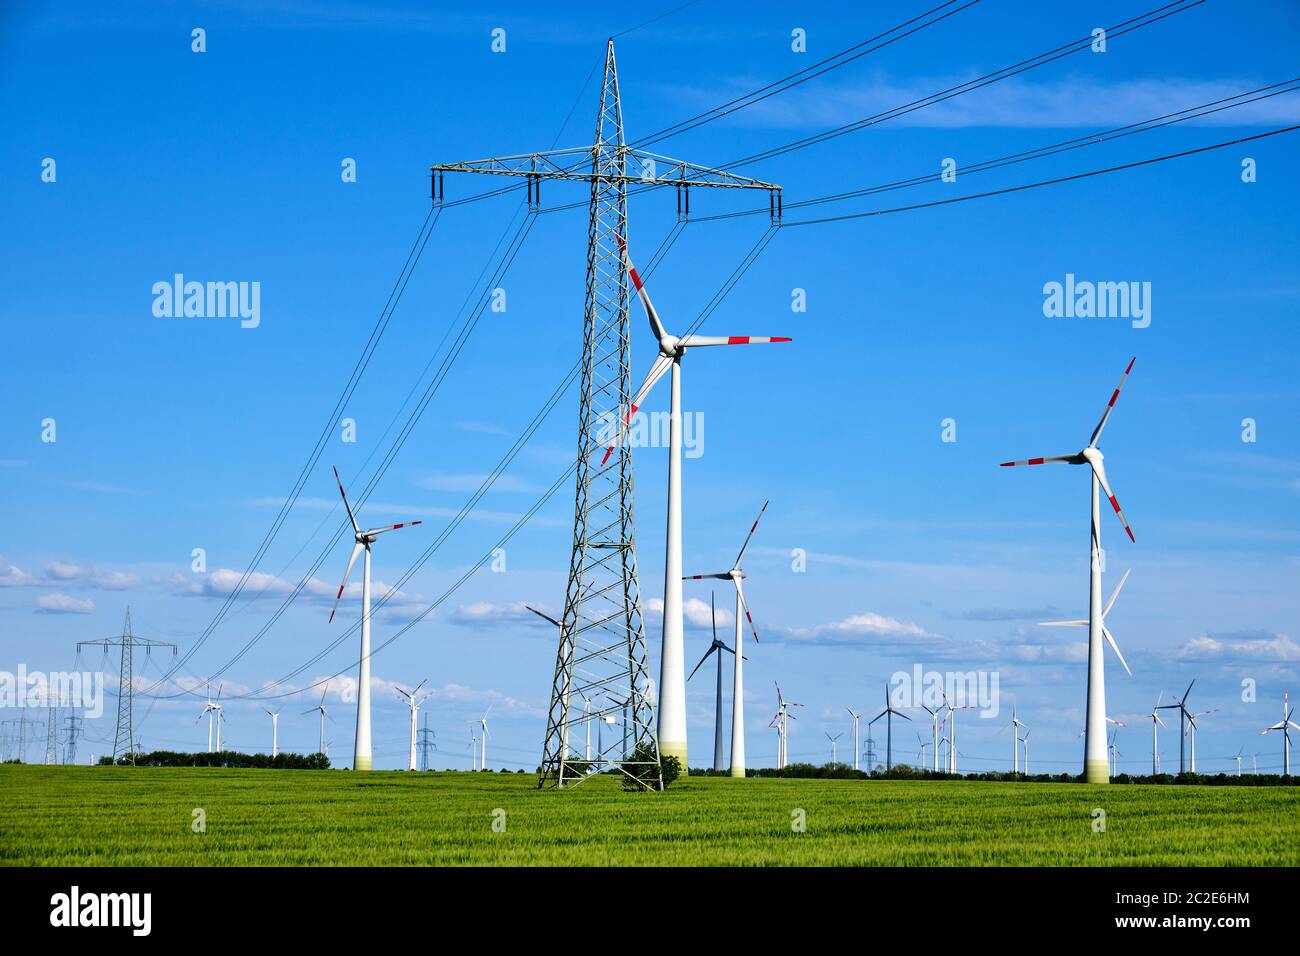 Overhead power lines and wind engines on a sunny day seen in Germany Stock Photo